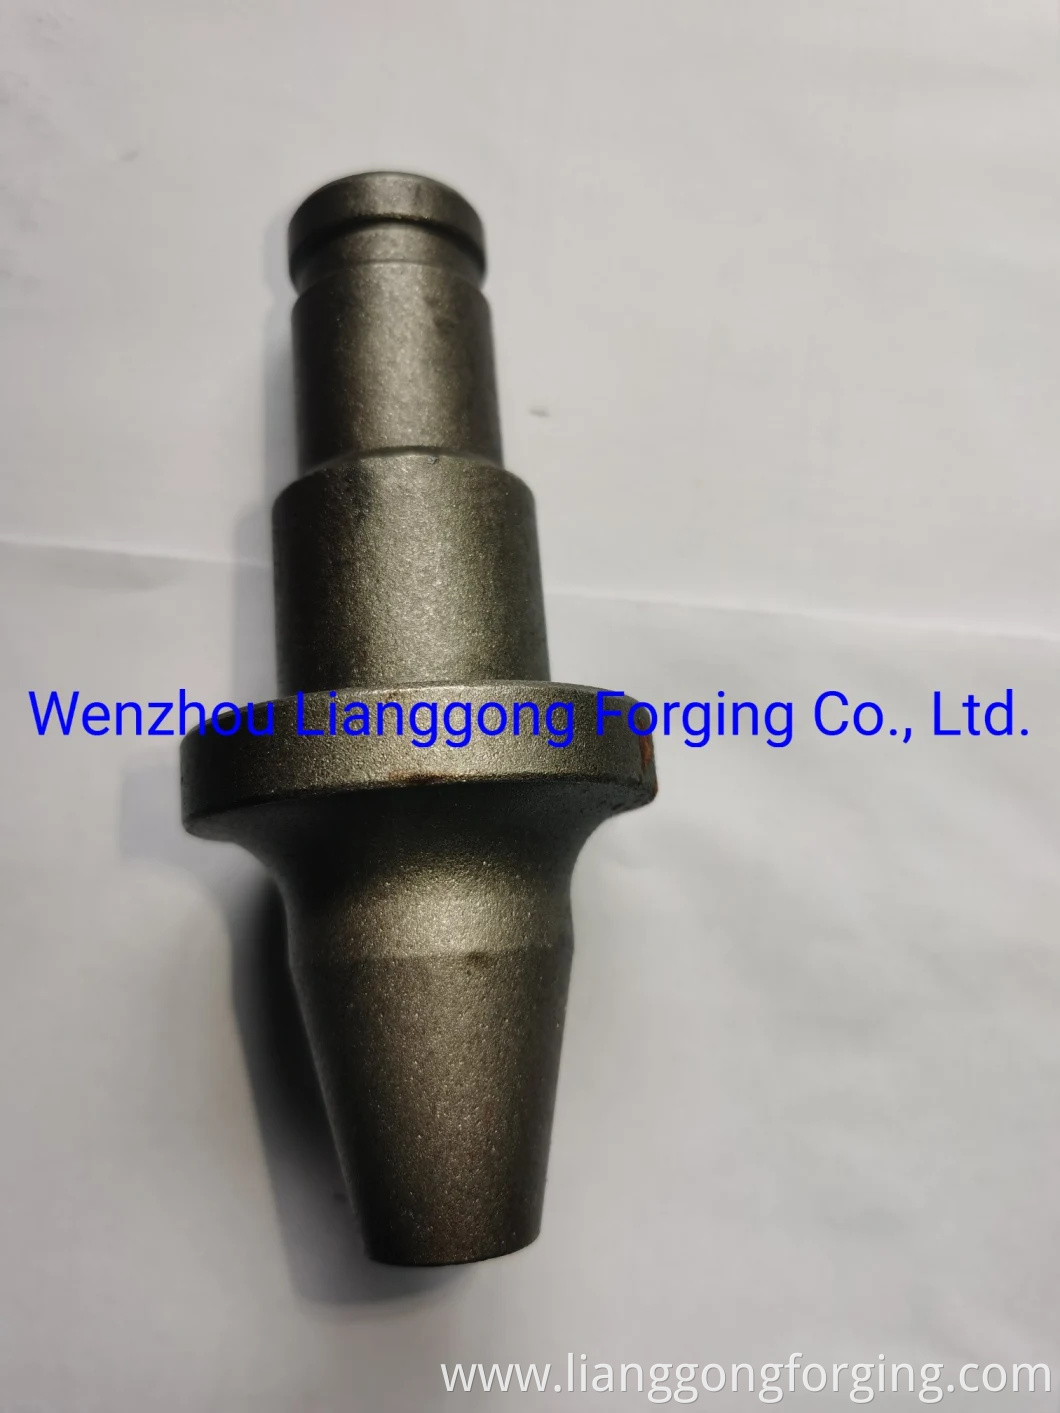 Drilling Bit Welding with Carbide Used in Mining and Tunneling Machinery